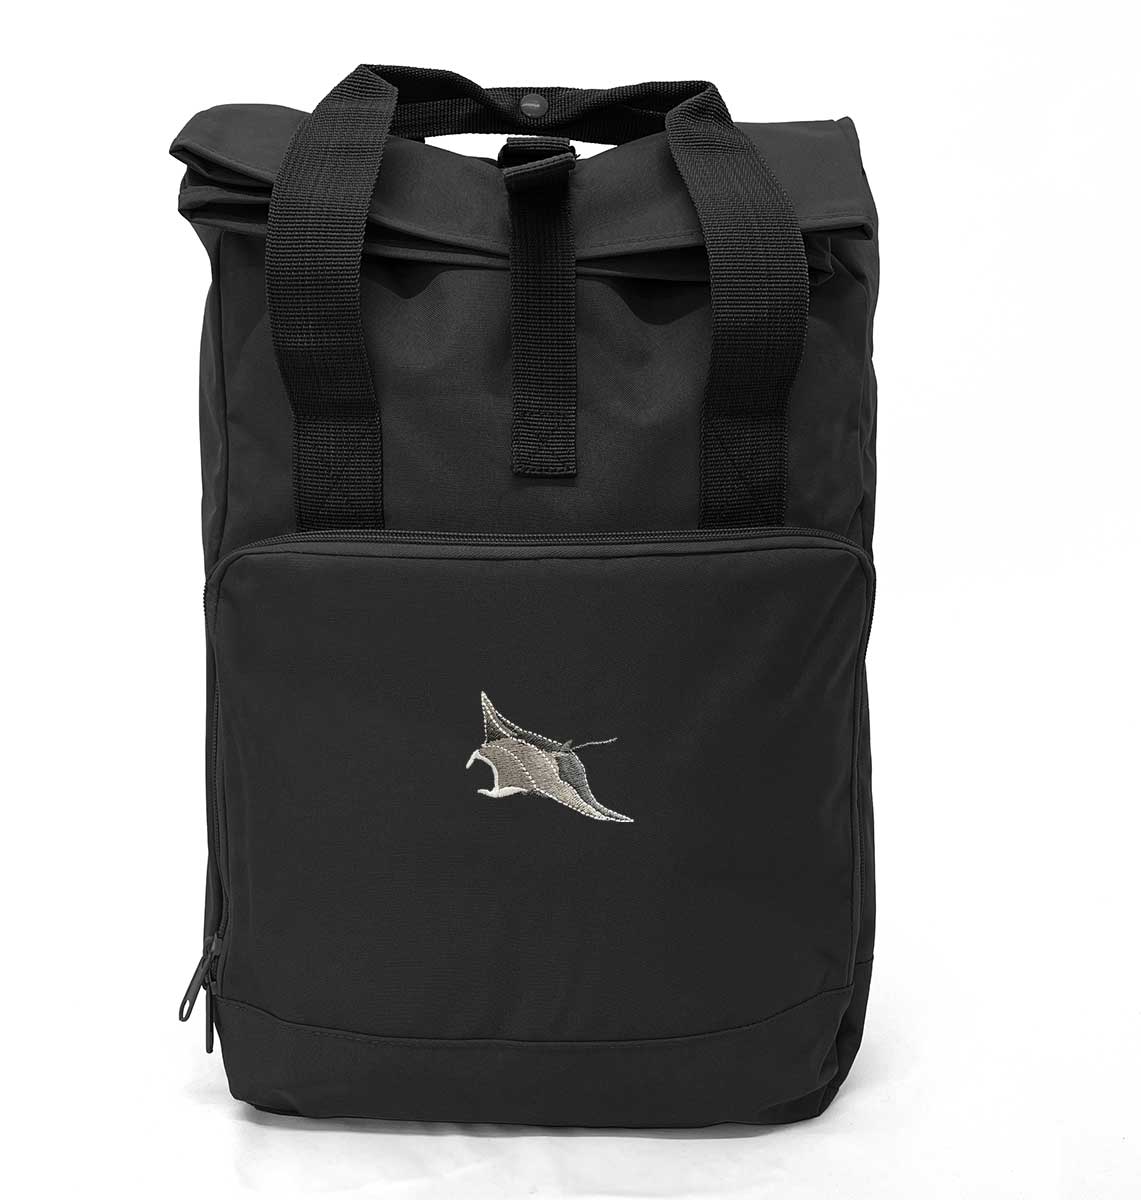 Manta Ray Large Roll-top Laptop Recycled Backpack - Blue Panda